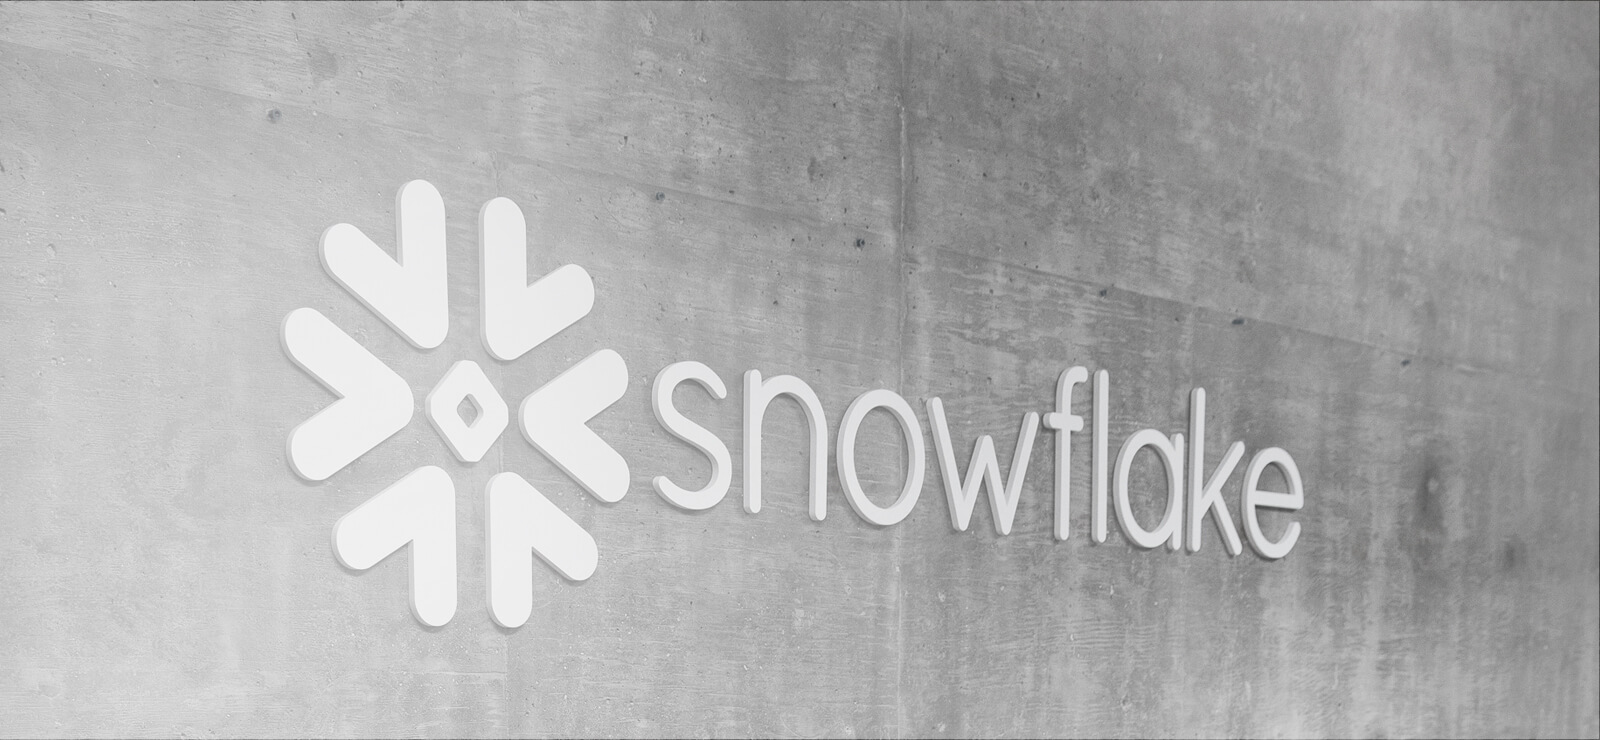 Partners Honored at the 2019 Snowflake EMEA Partner Summit